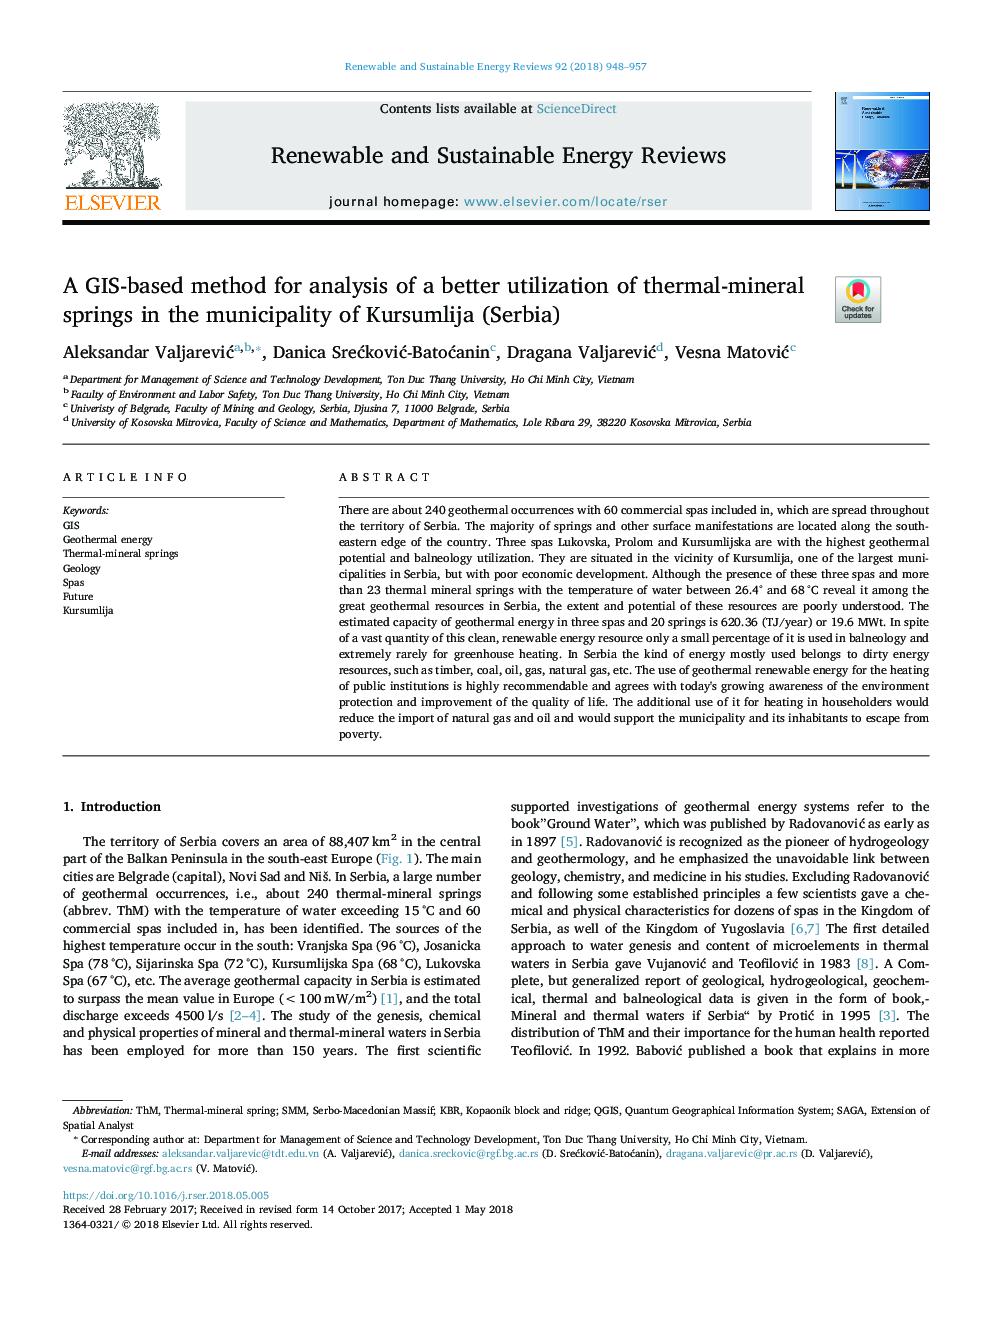 A GIS-based method for analysis of a better utilization of thermal-mineral springs in the municipality of Kursumlija (Serbia)